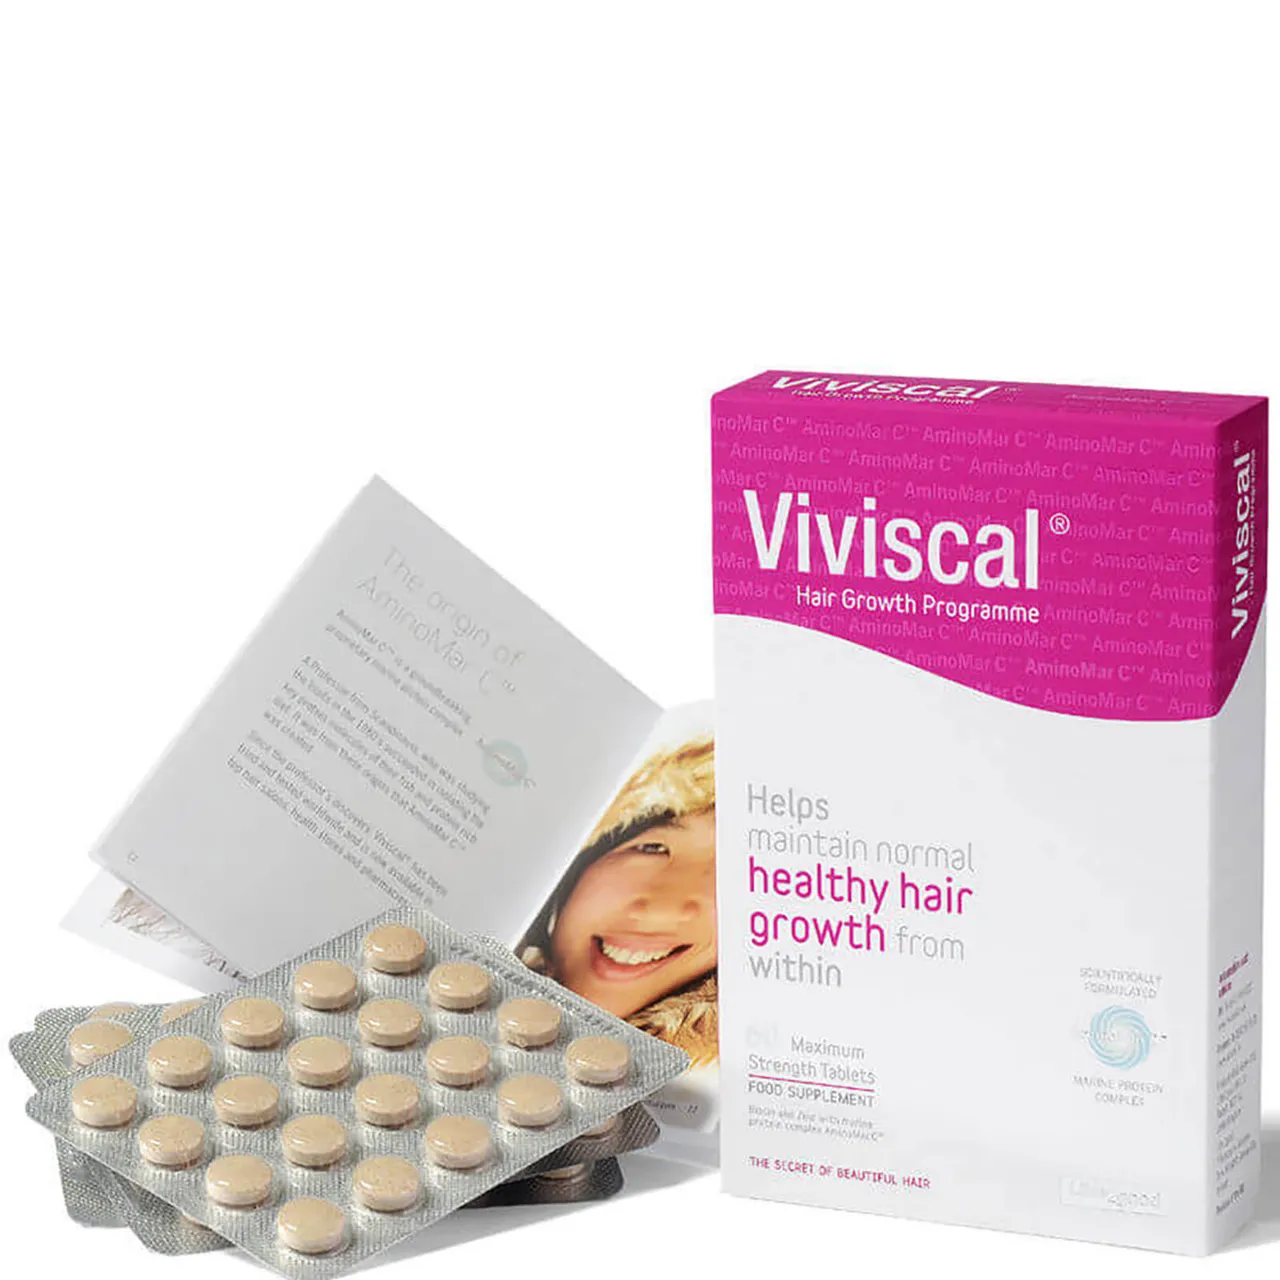 Viviscal Biotin and Zinc Hair Supplement Tablets for Women - 60 Tablets (1 Month Supply)